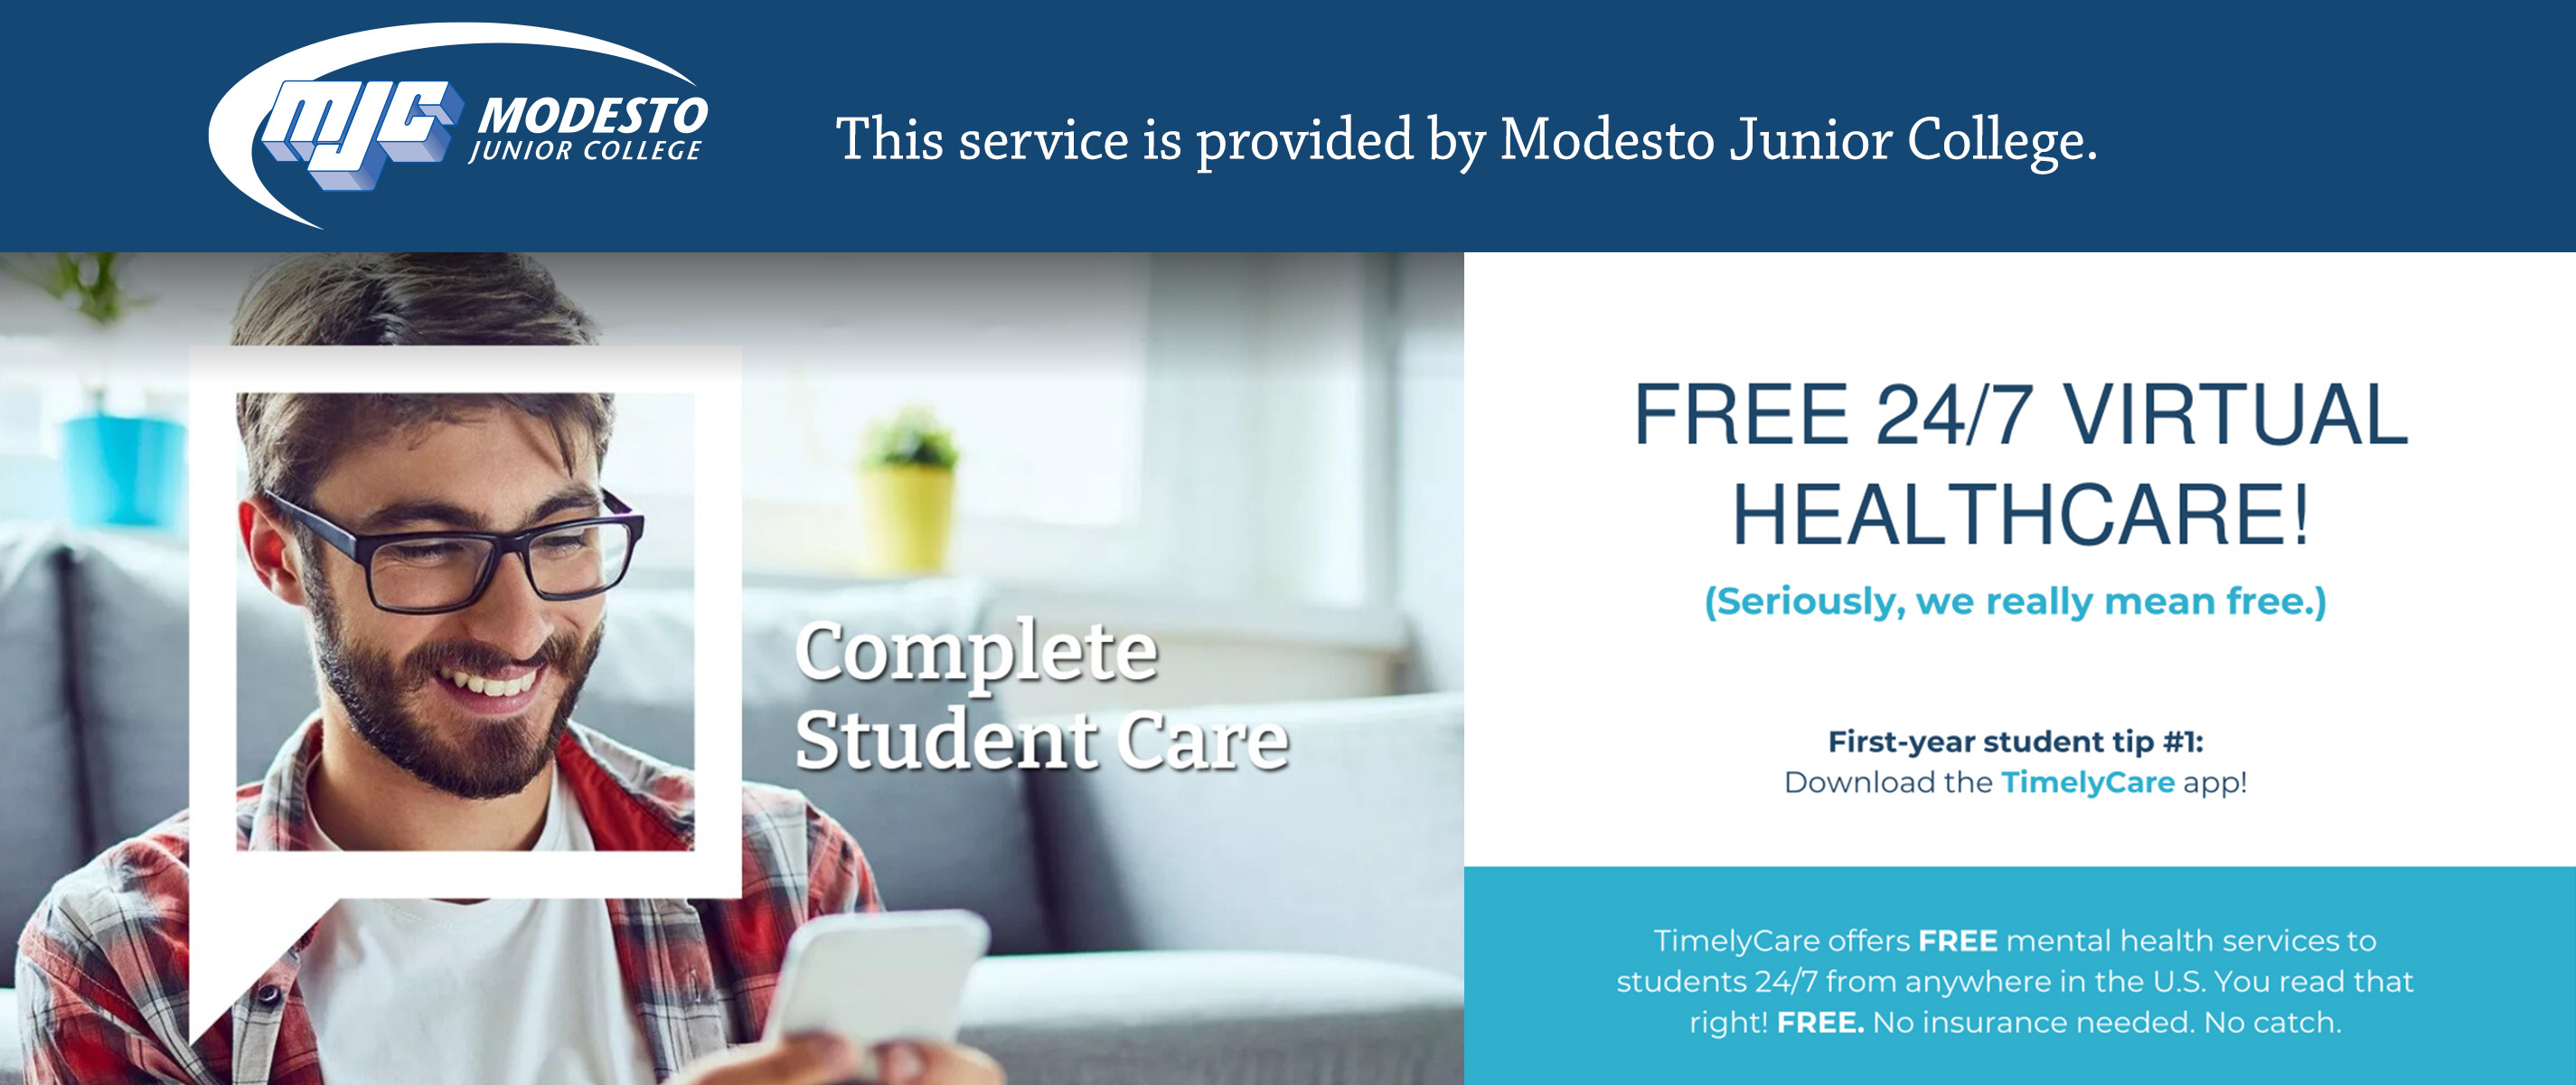 Timely Care: Care anytime, anywhere. Talk now, scheduled couseling and basic needs. This service is provided by Modesto Junior College